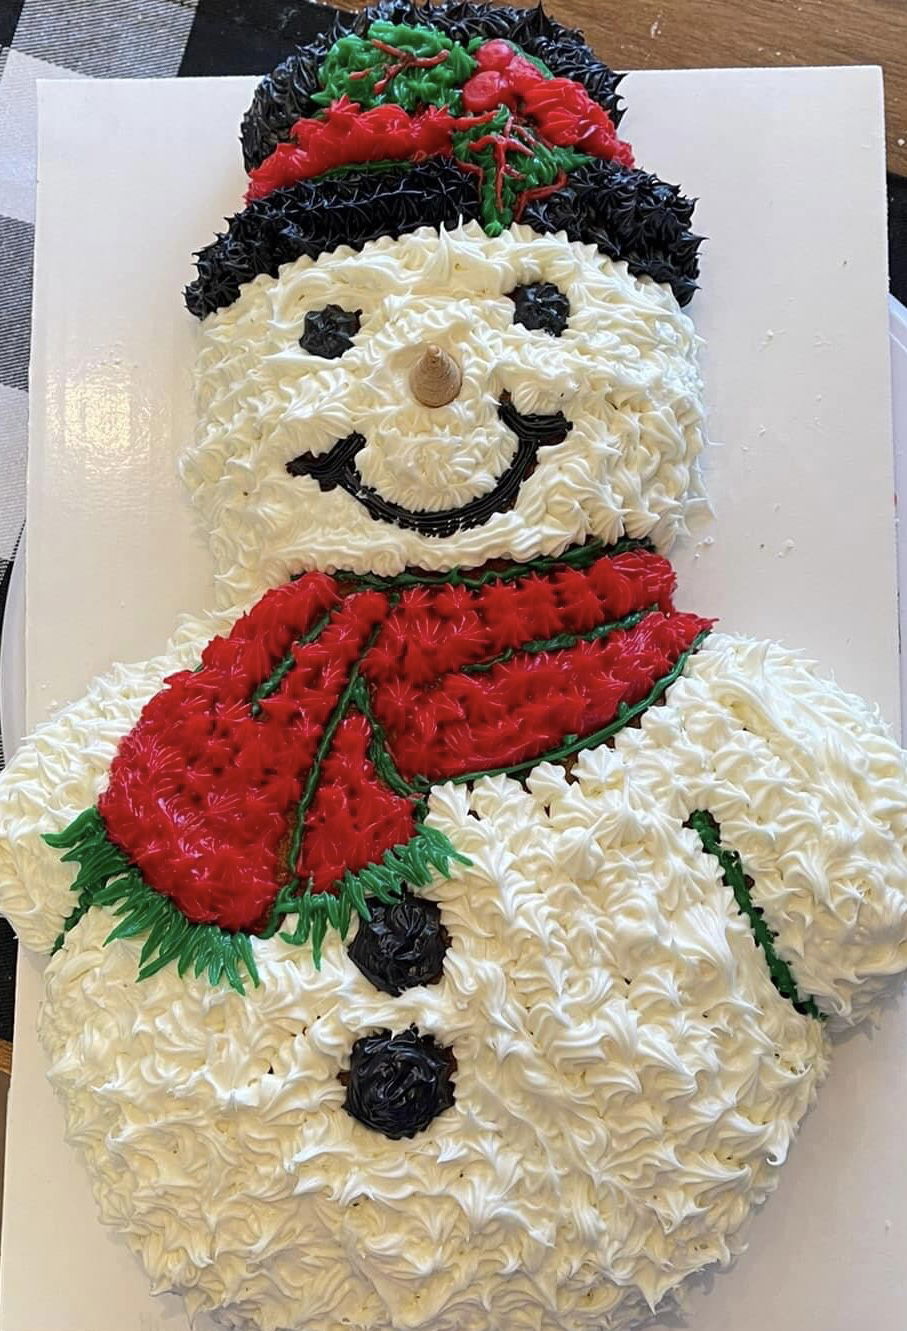 Vanilla Frosty The Snowman Cake with Buttercream Frosting